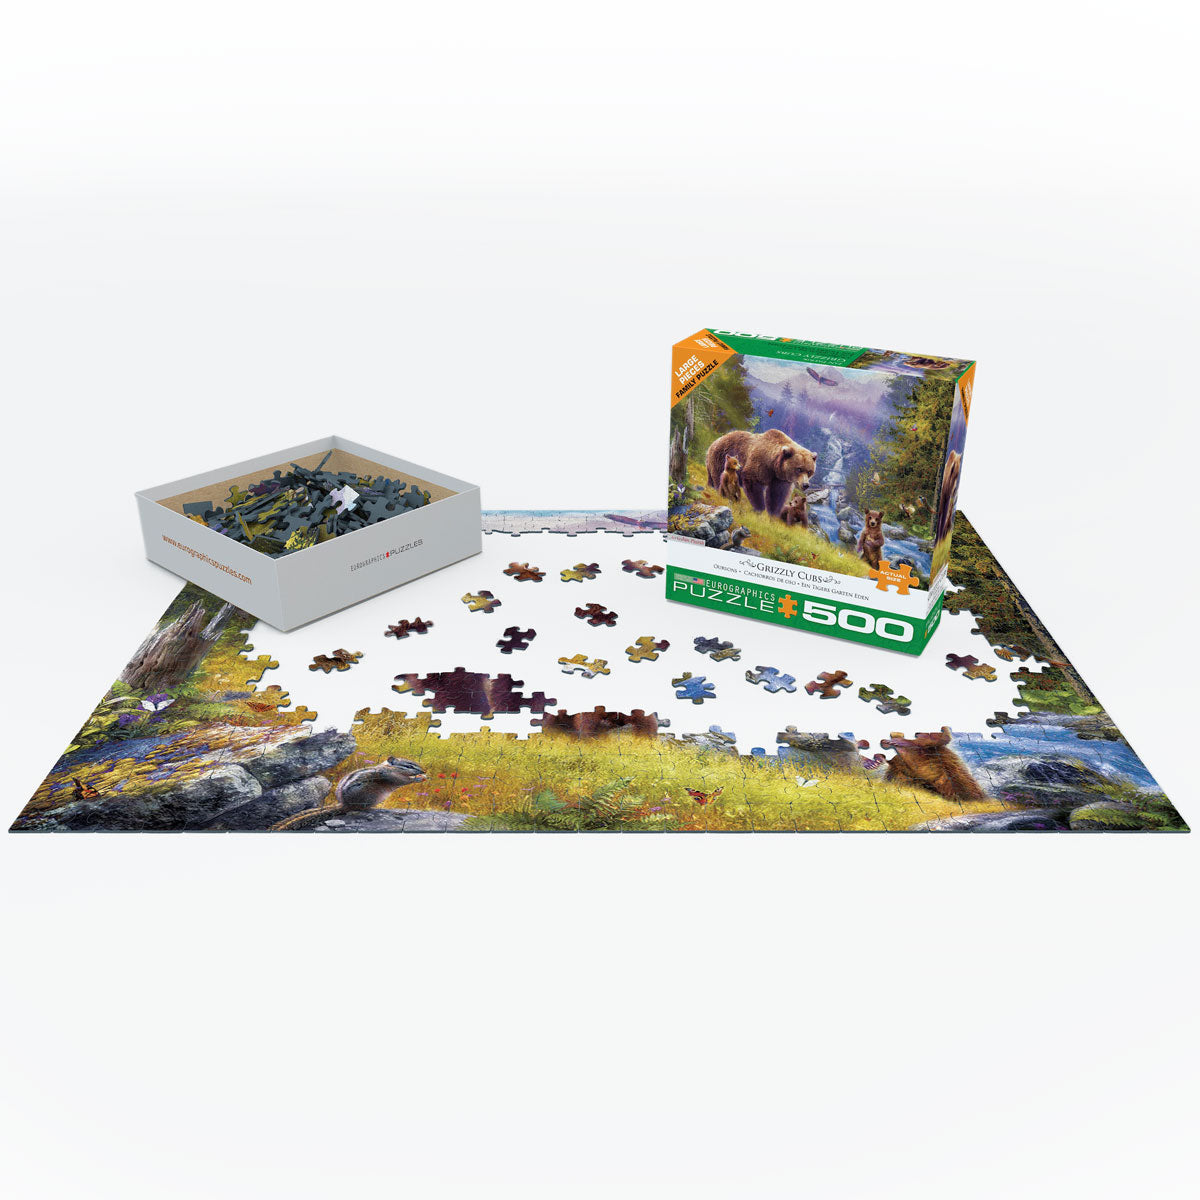 Grizzly Cubs - 500pc Large